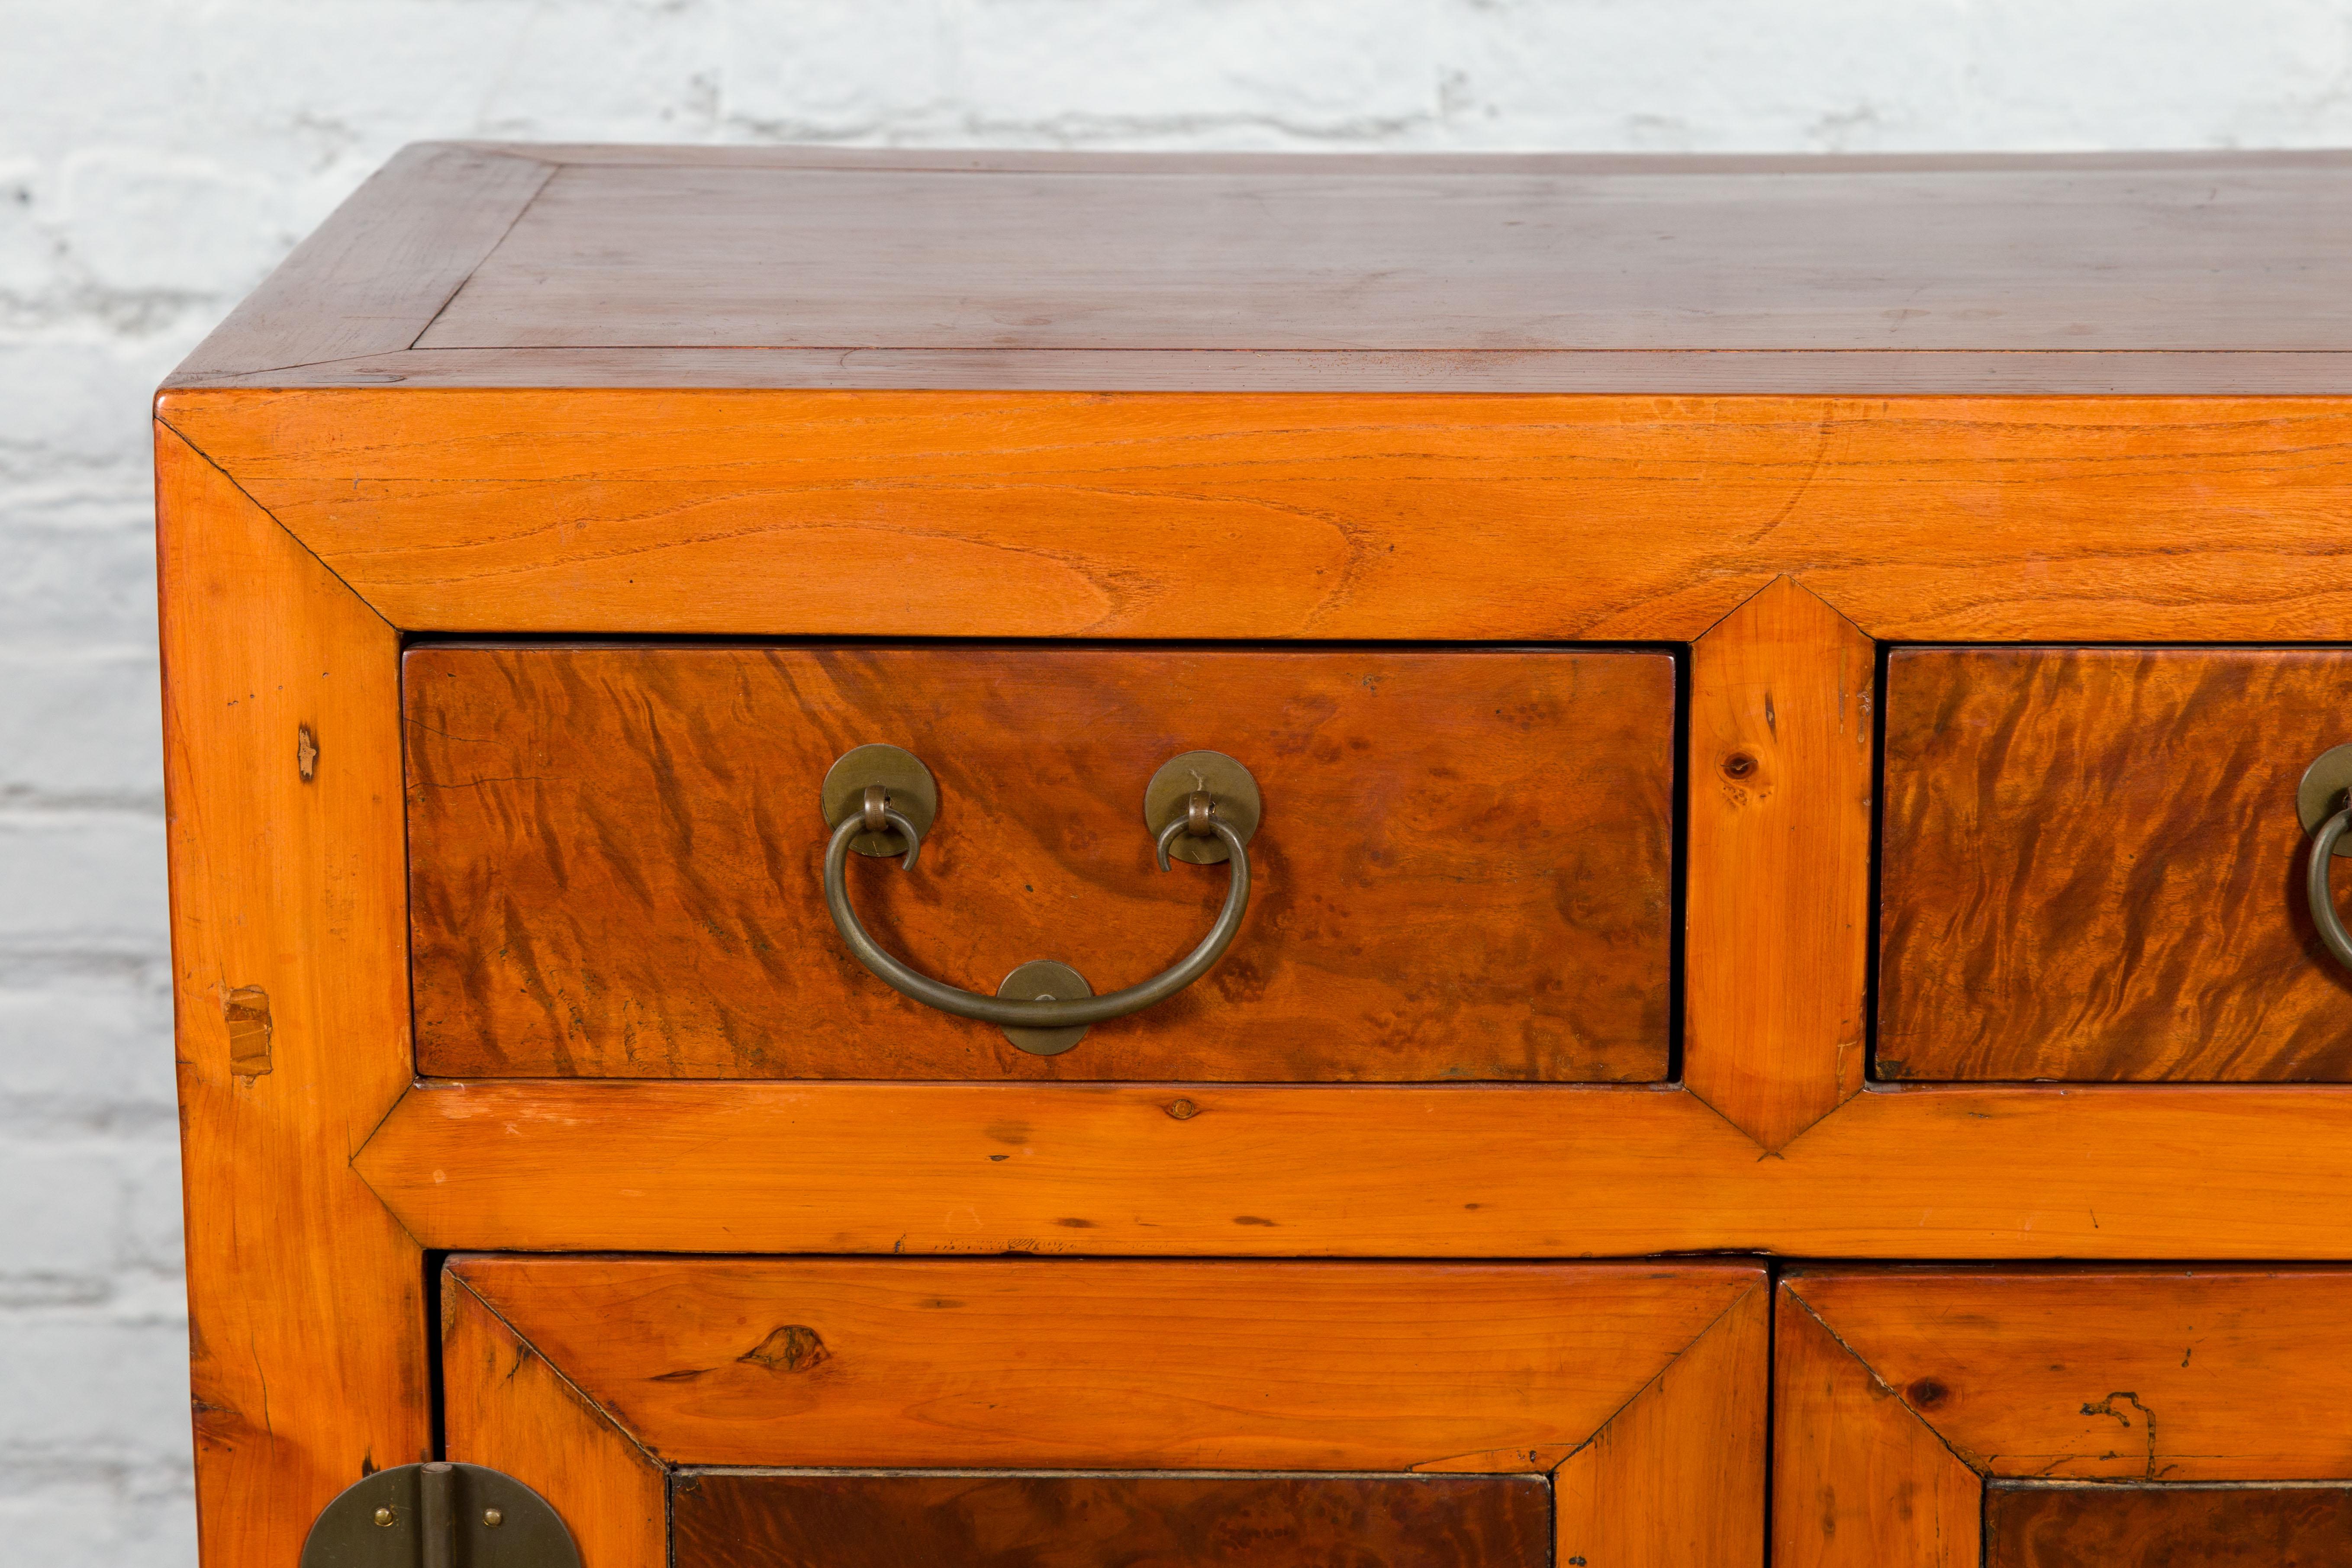 Chinese Qing Dynasty 19th Century Two-Toned Elm Cabinet with Burl Wood Accents For Sale 3